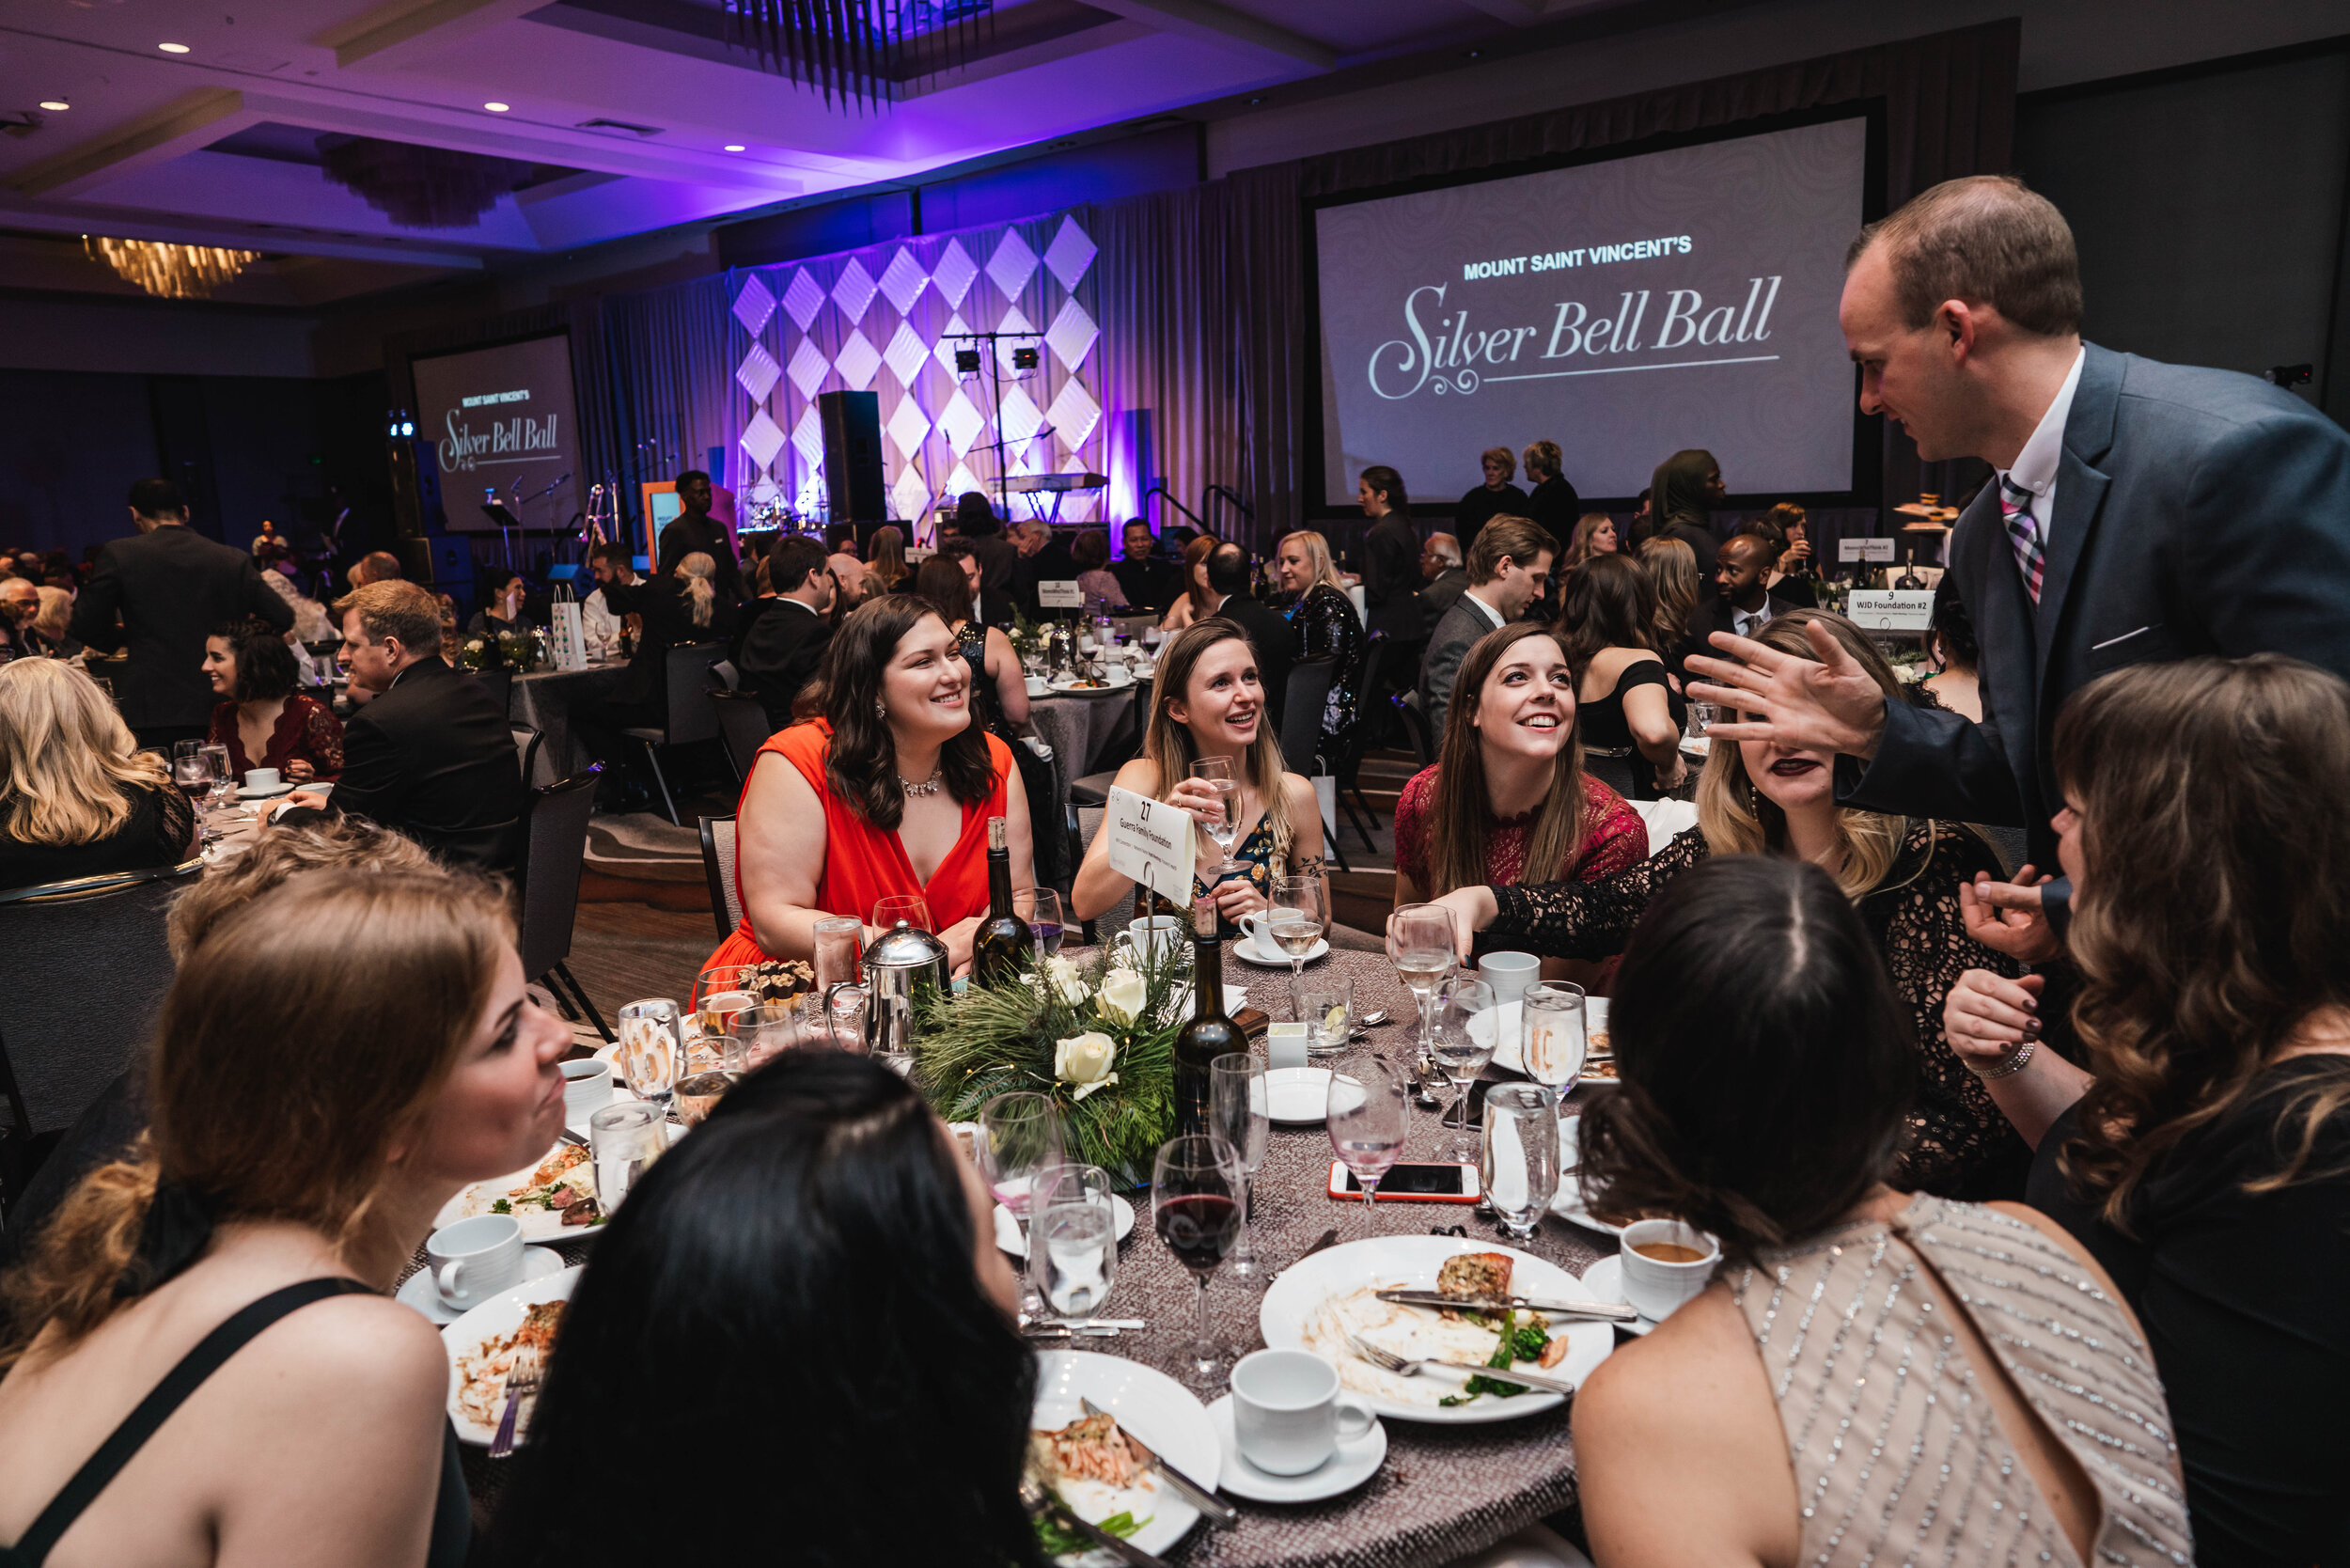 denver event photography at gaylord rockies gala black tie event - 7.jpg